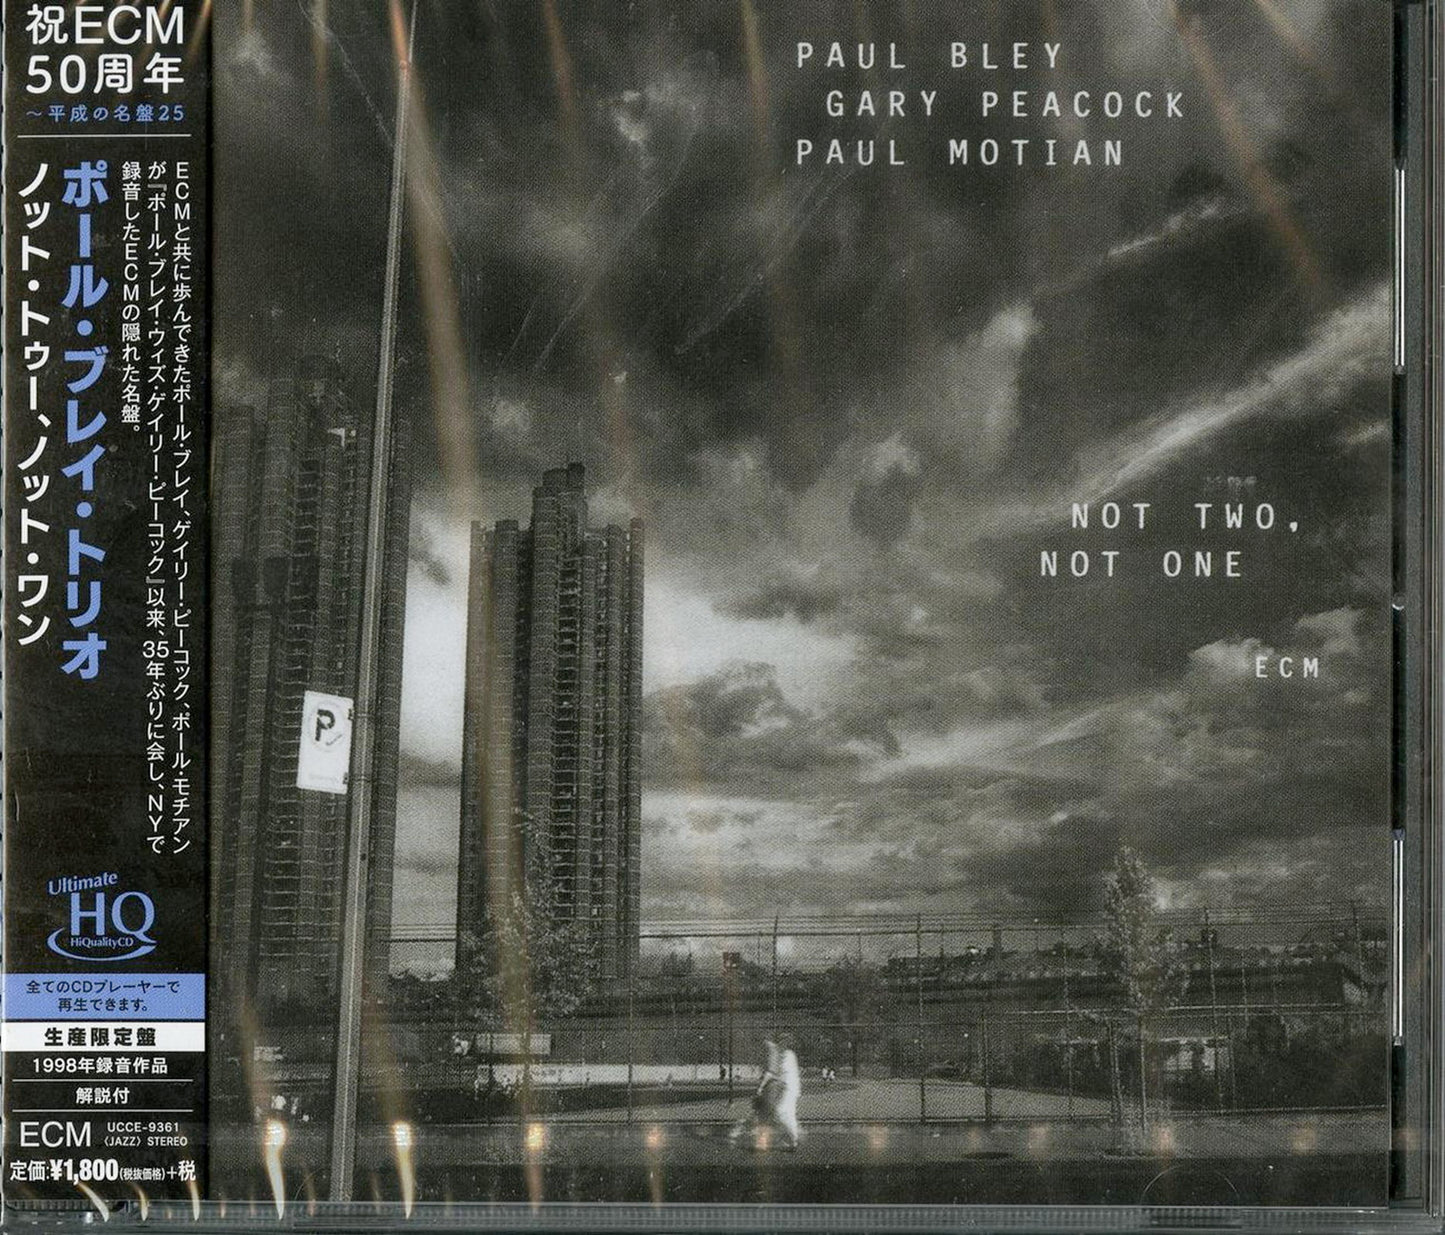 Paul Bley - Not Two. Not One - Japan  UHQCD Limited Edition